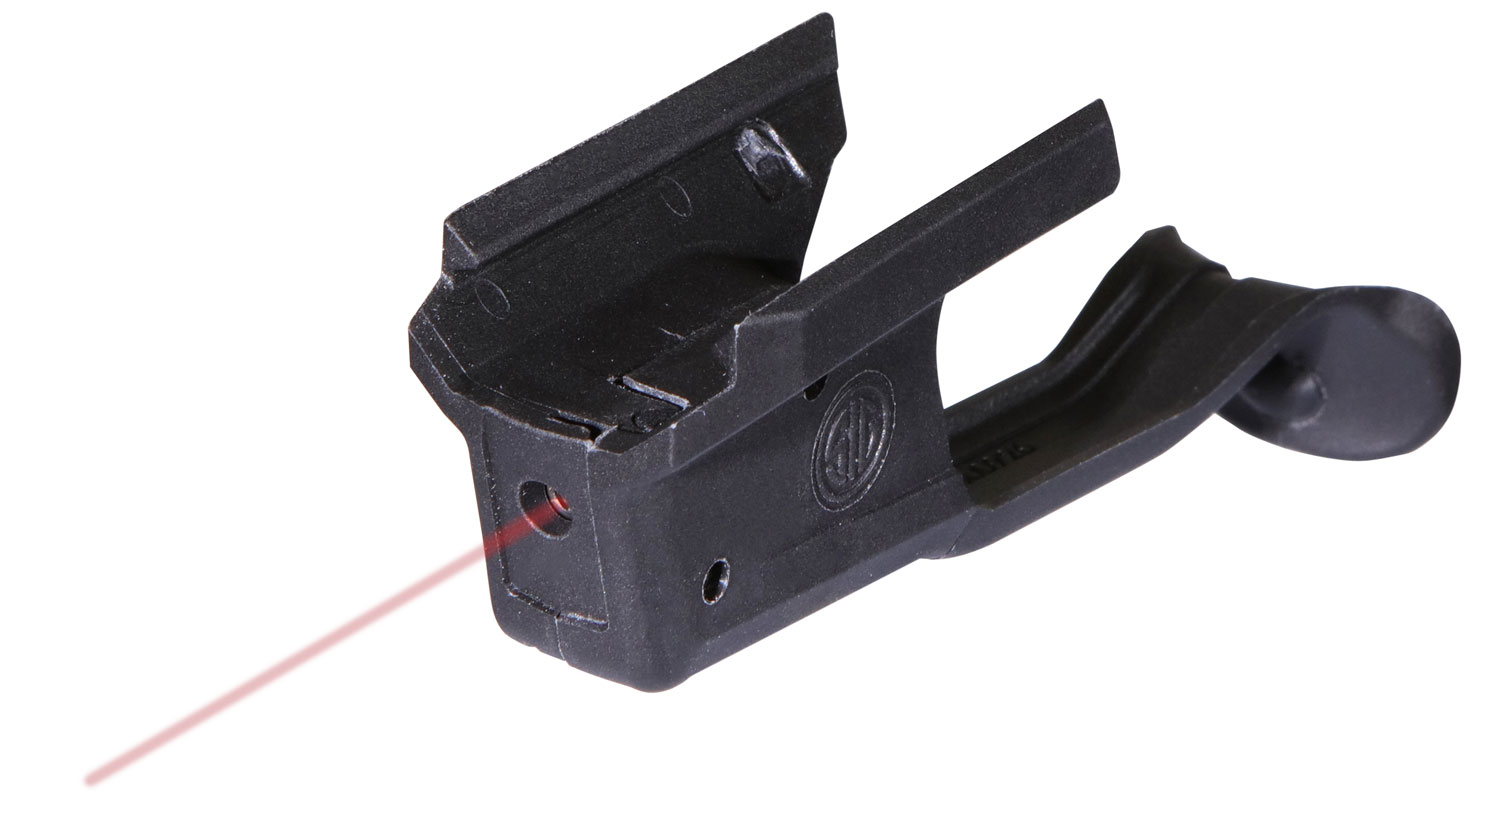 Sig Sauer Electro-Optics SOL36501 Lima365 Laser Tigger Guard Mounted 5mW Red Laser with 637nM Wavelength & Black Finish for Sig P365, P365 XL, P365X